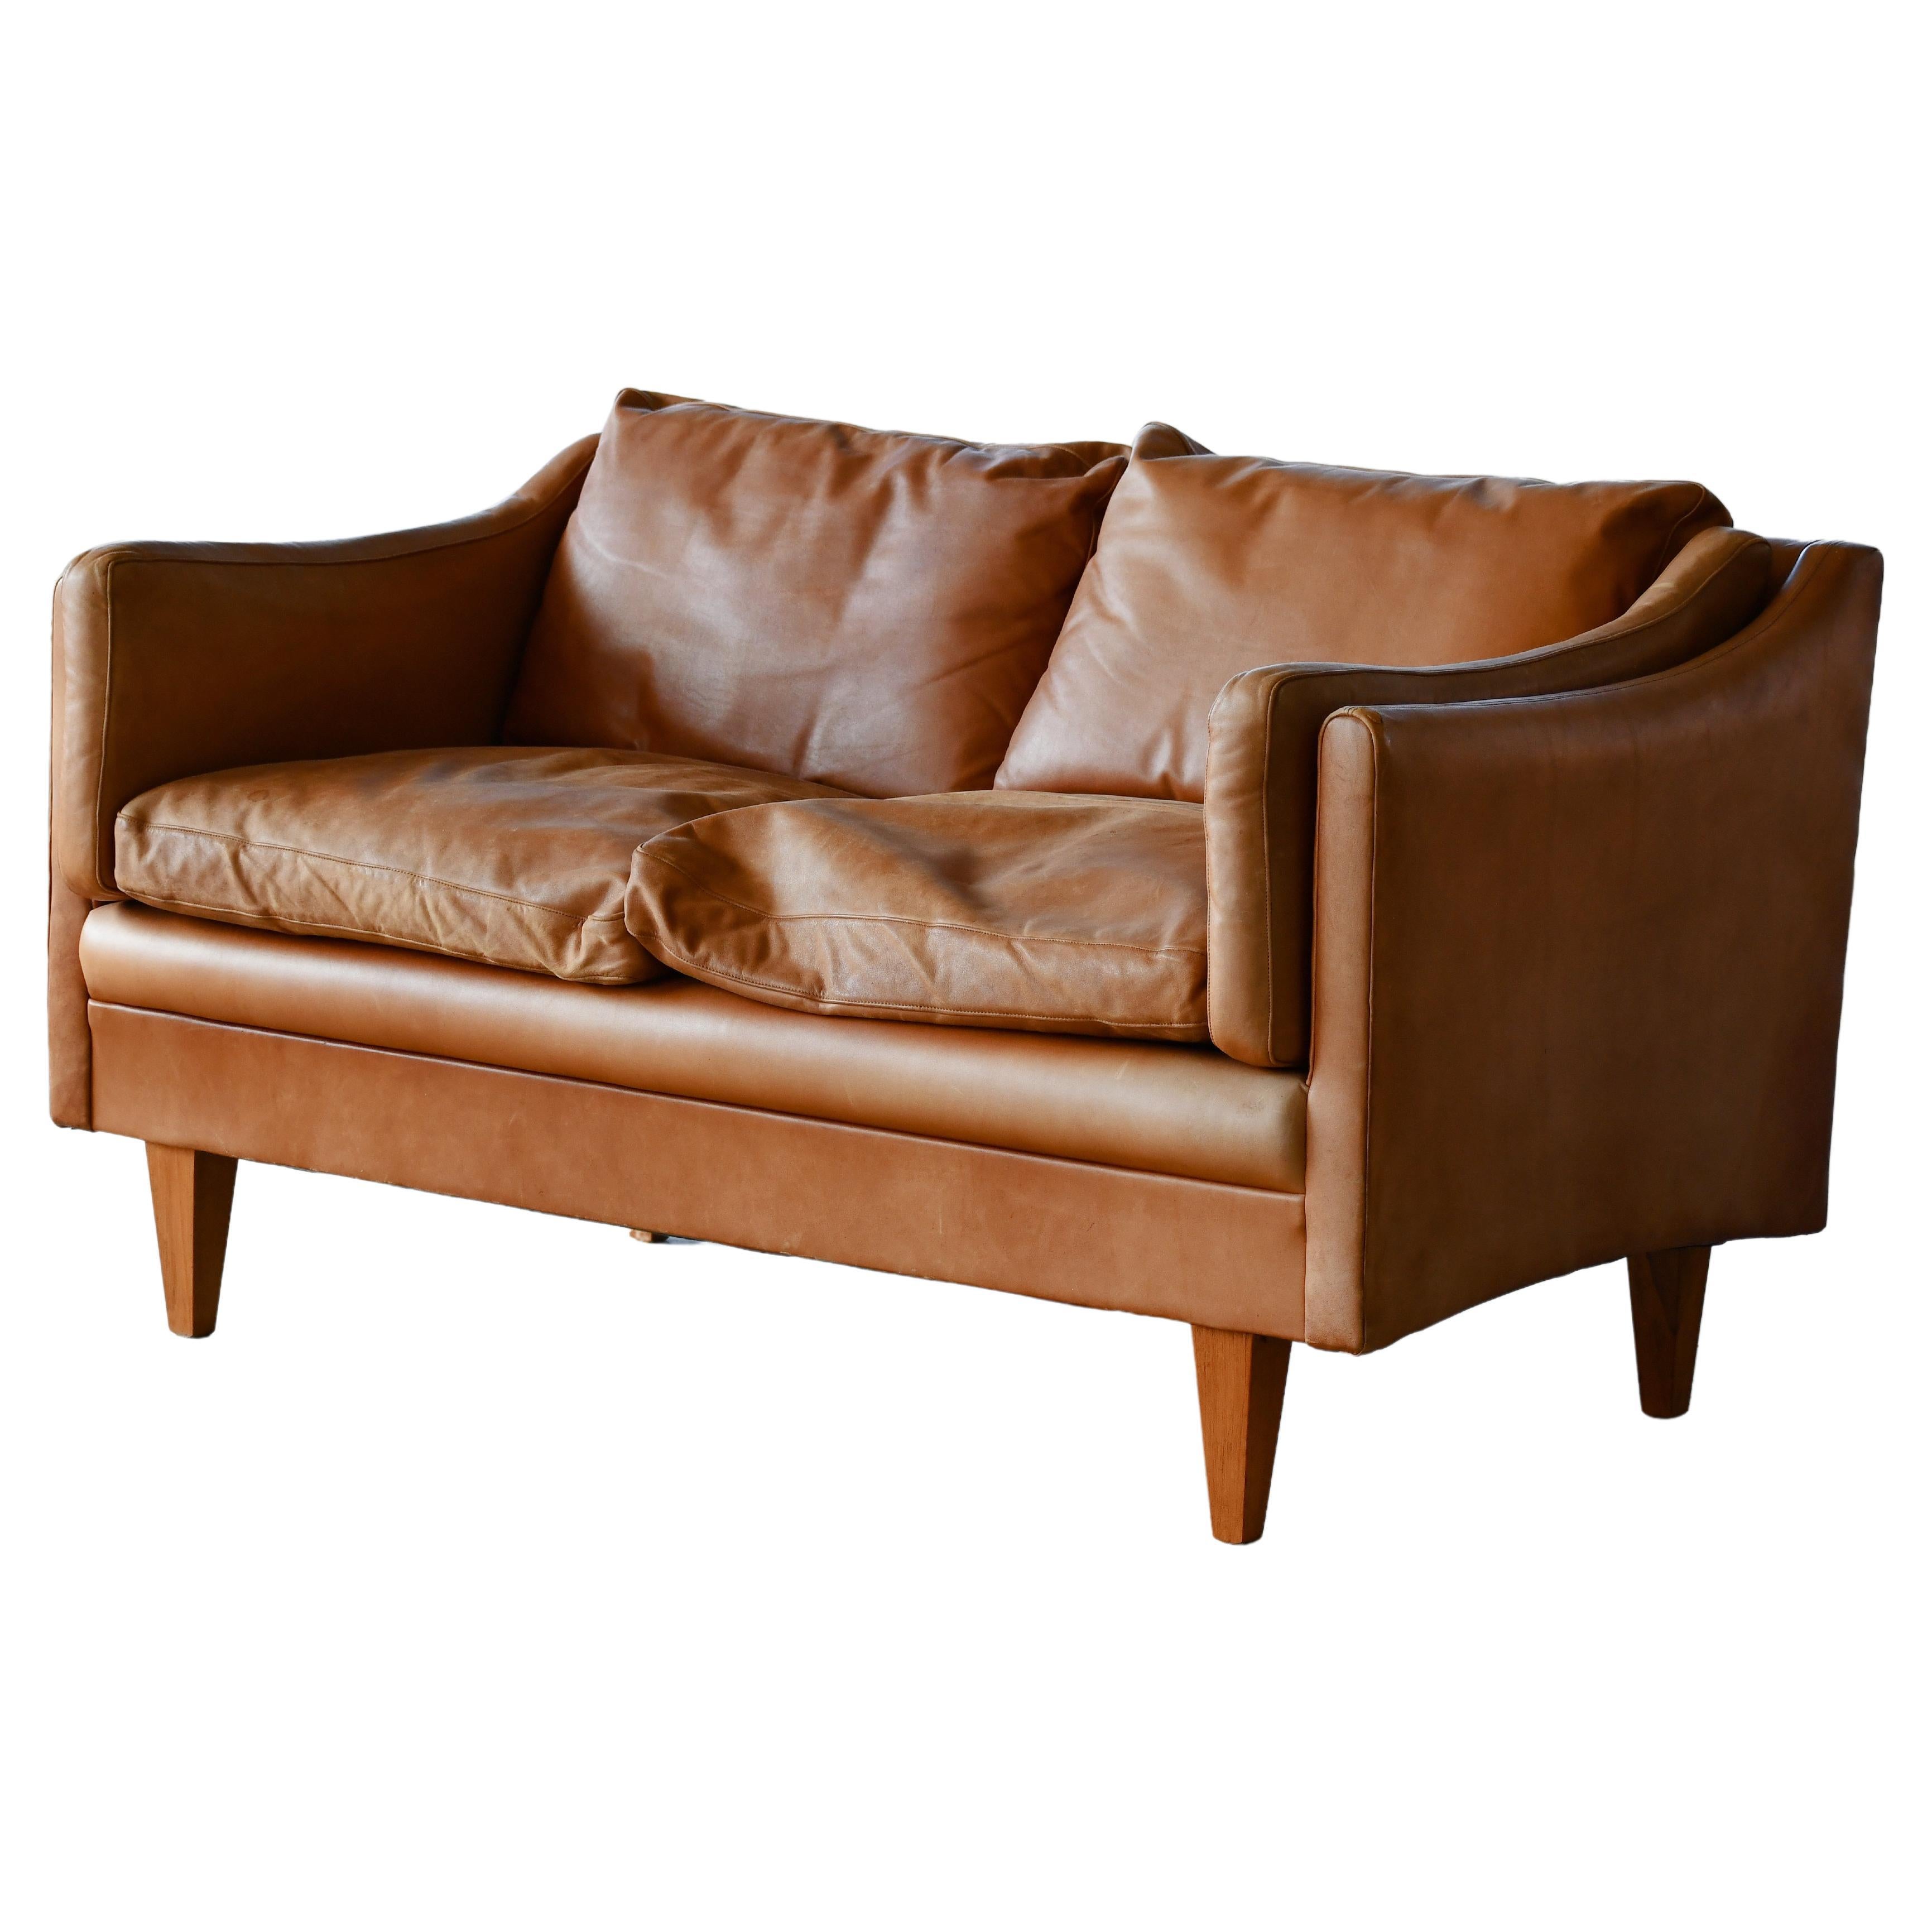 Classic Danish 1960s Two-Seat Sofa or Loveseat in Cognac Colored Leather 